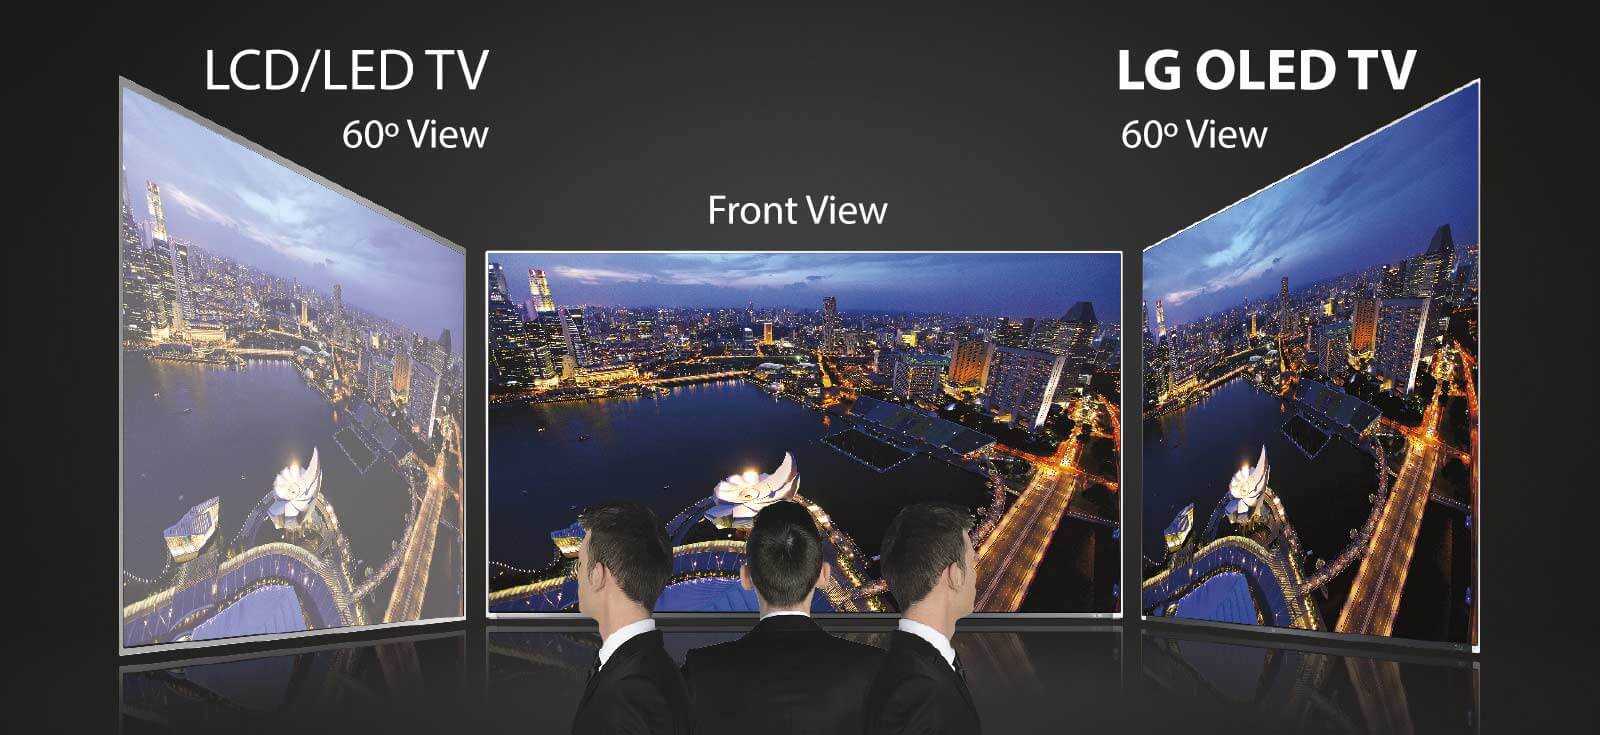 OLED offers the widest viewing angles when compared to LED